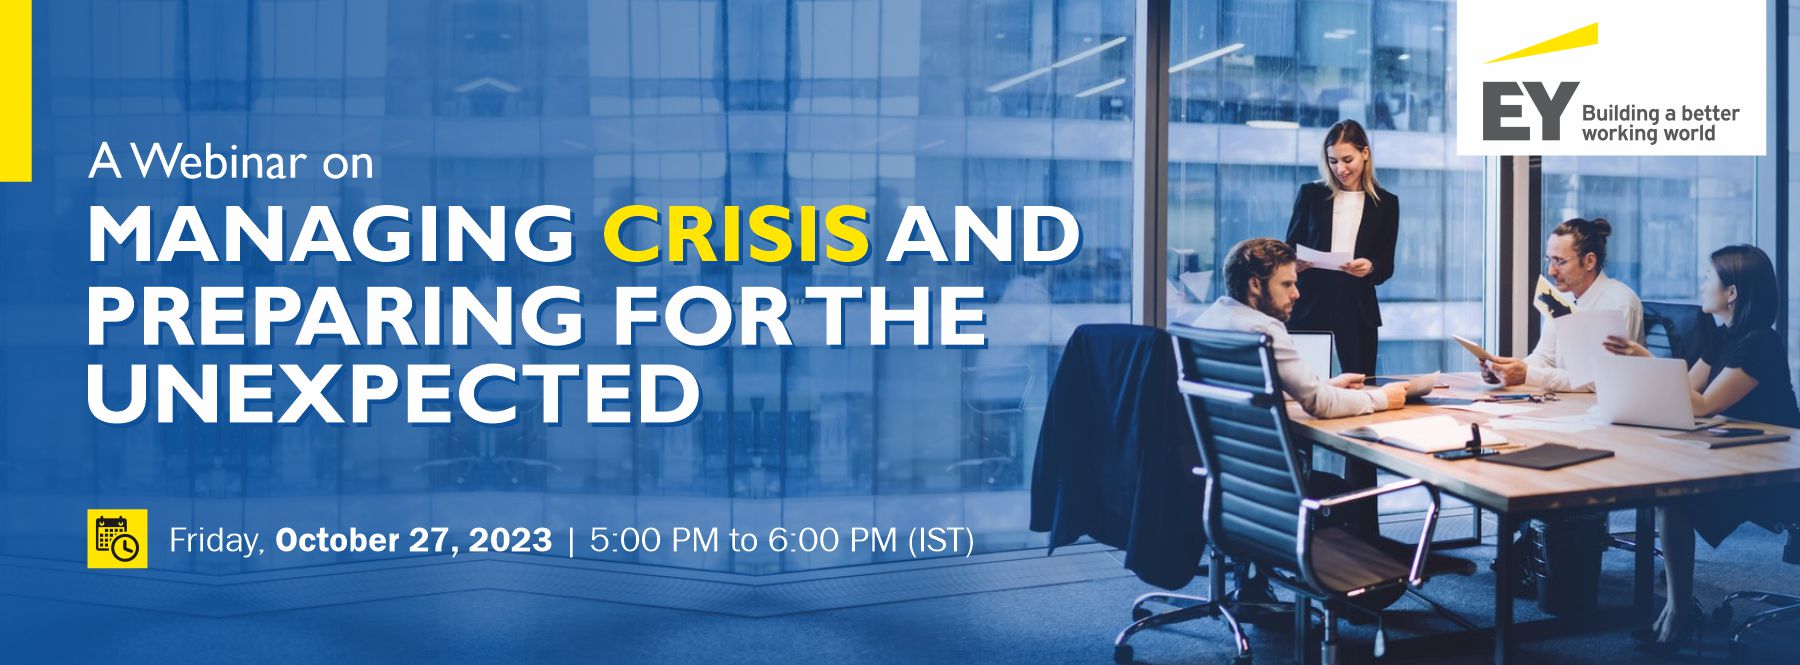 Webinar on Managing Crisis and Preparing for the Unexpected